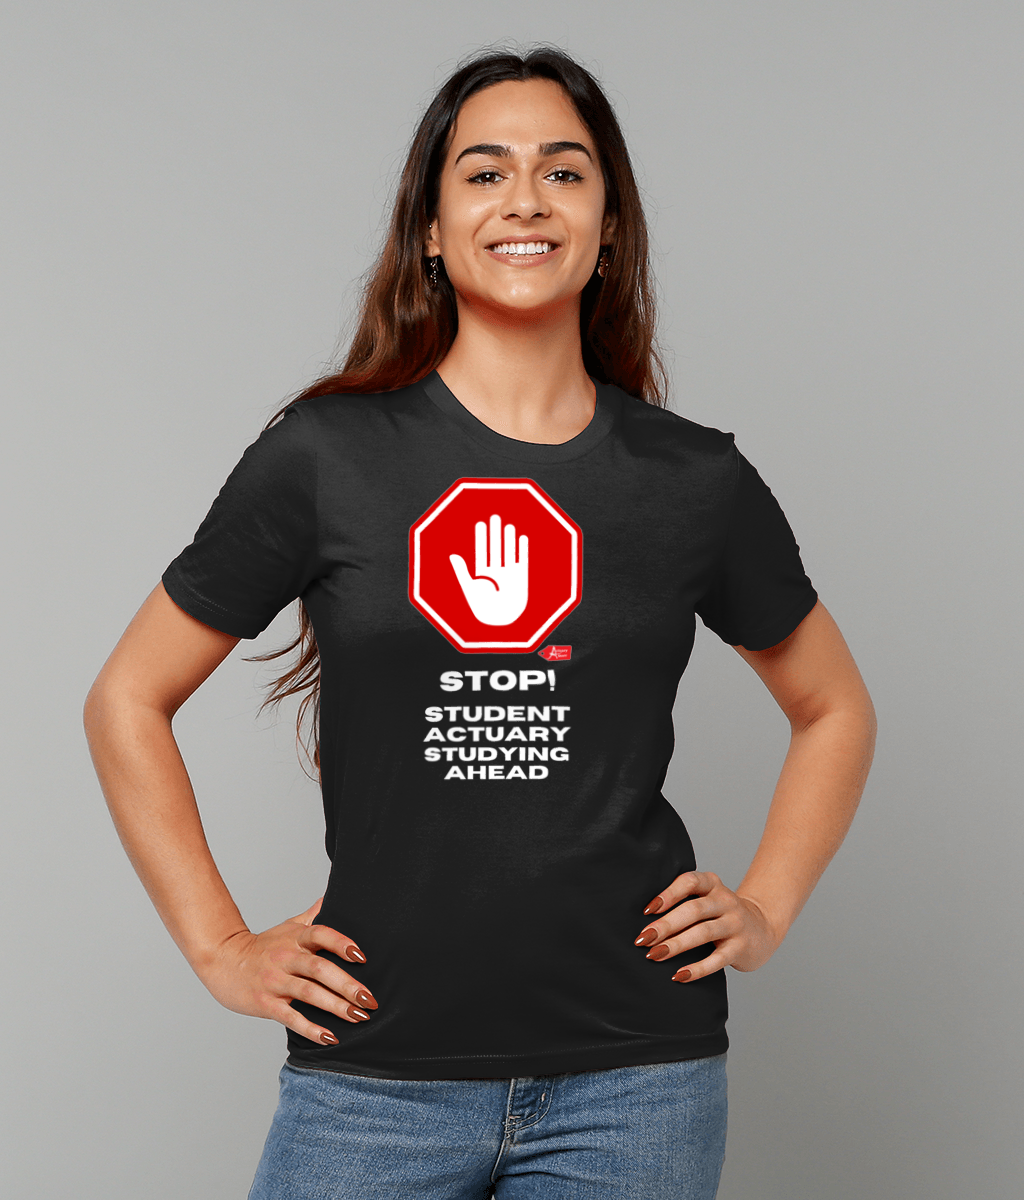 Stop! Student Actuary Studying Ahead T-Shirt